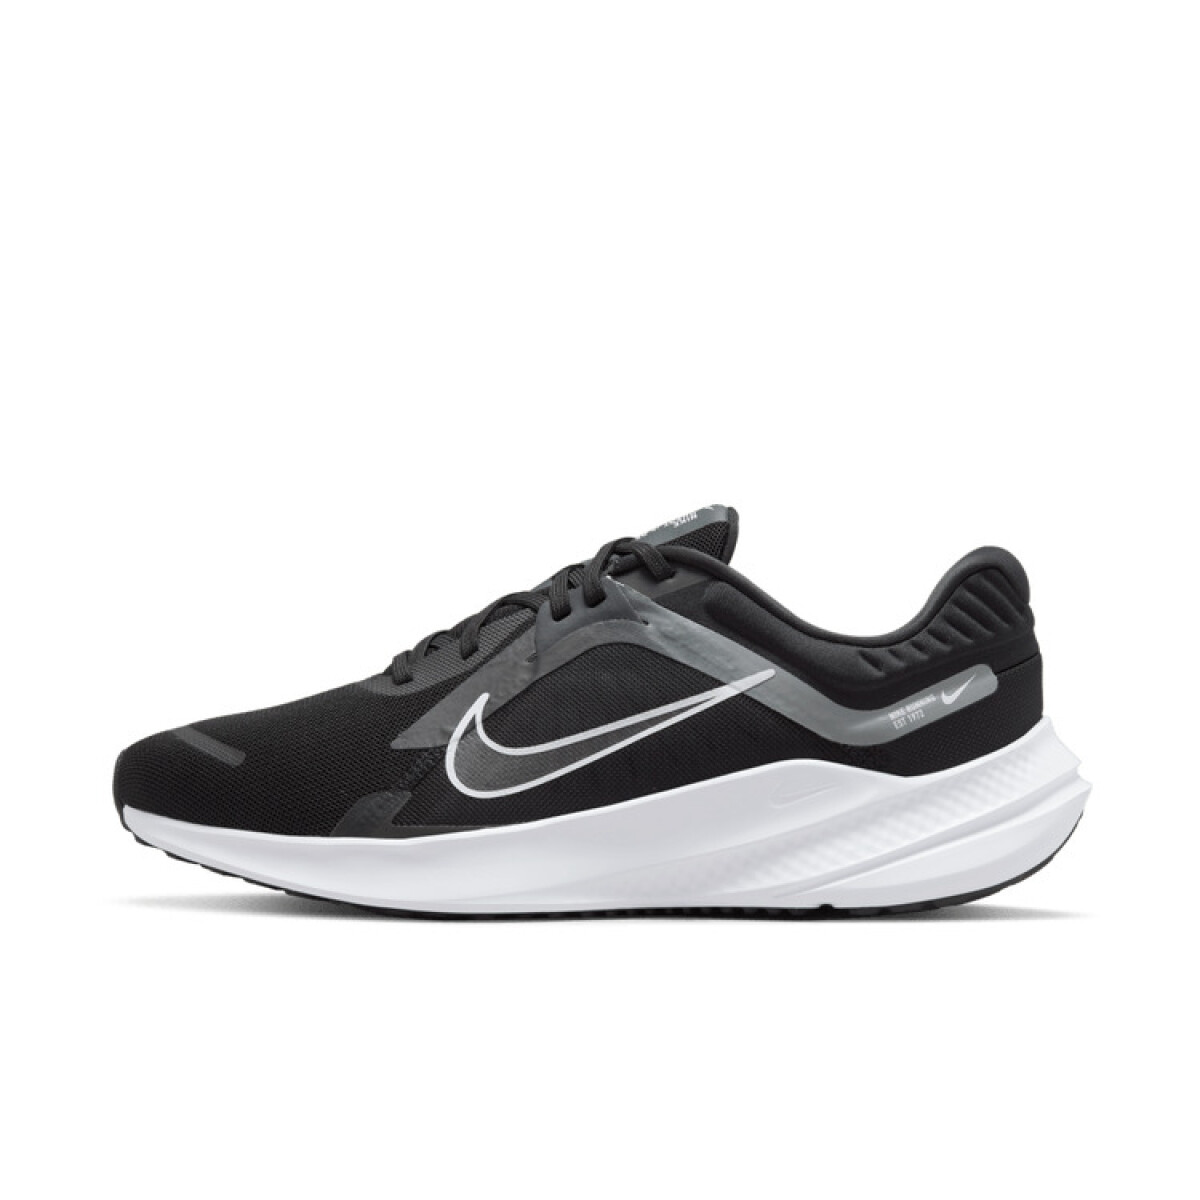 Champion Nike Running Hombre Quest 5 Black - S/C 